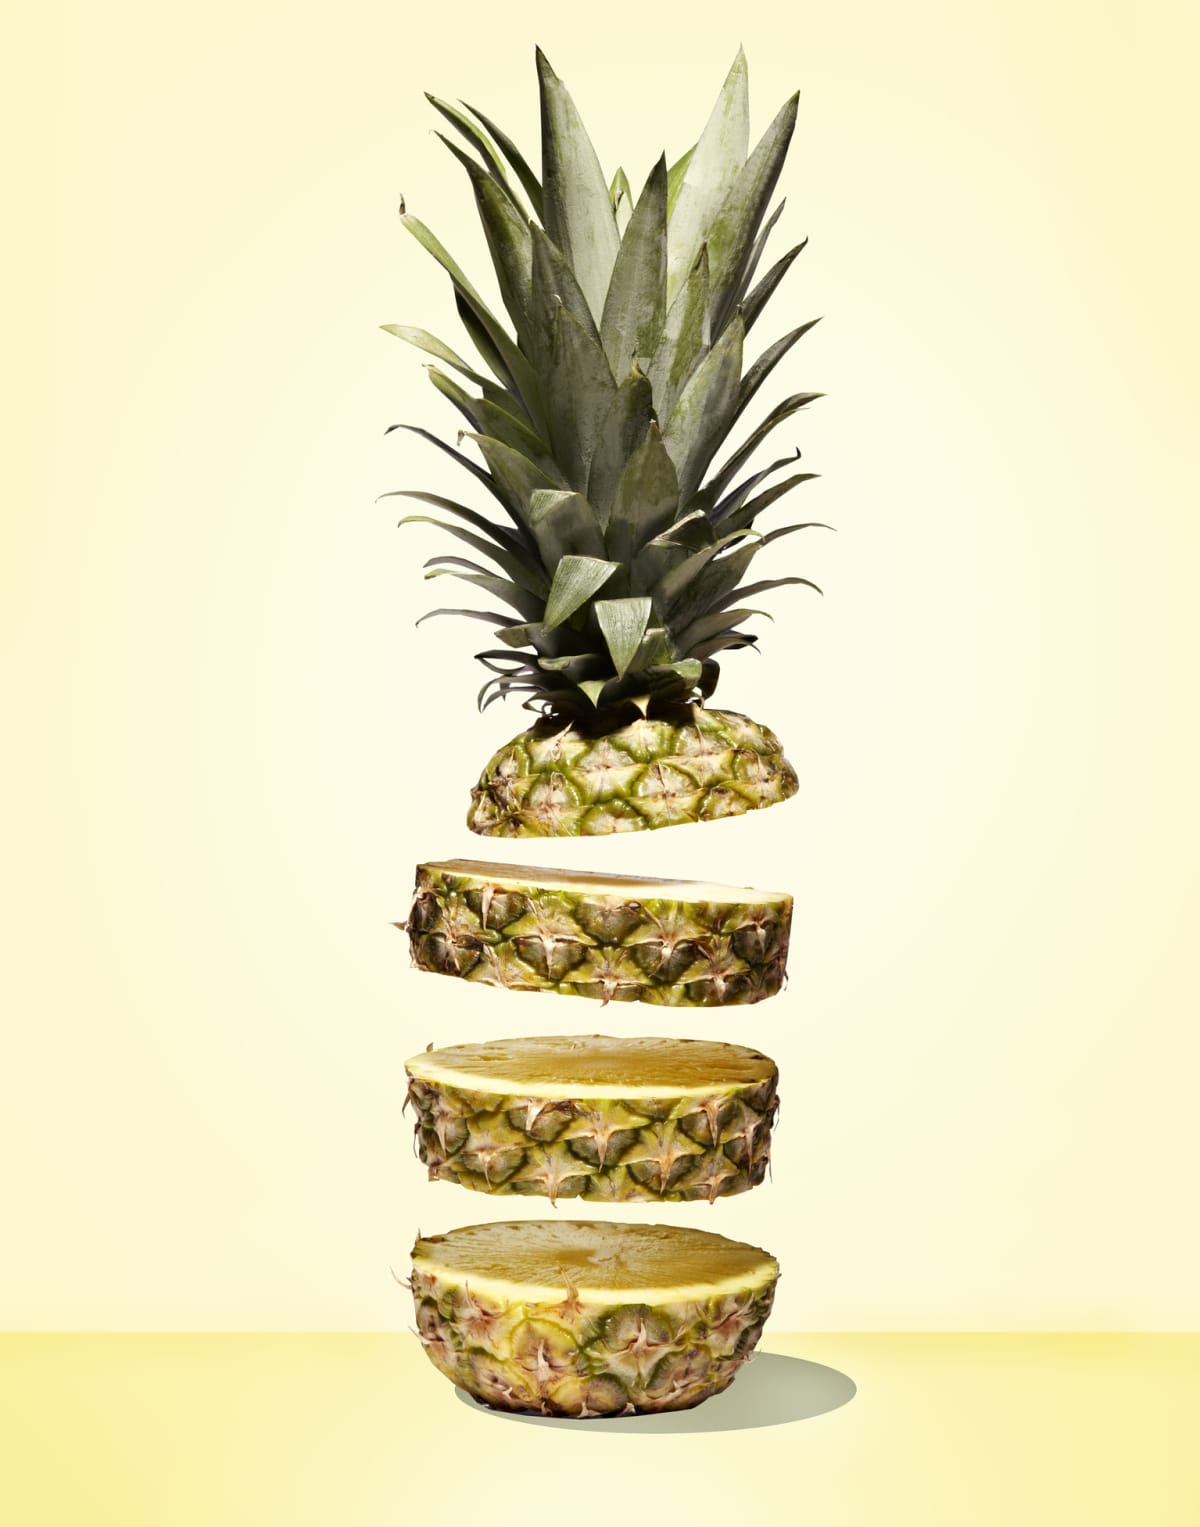 pineapple cut into slices